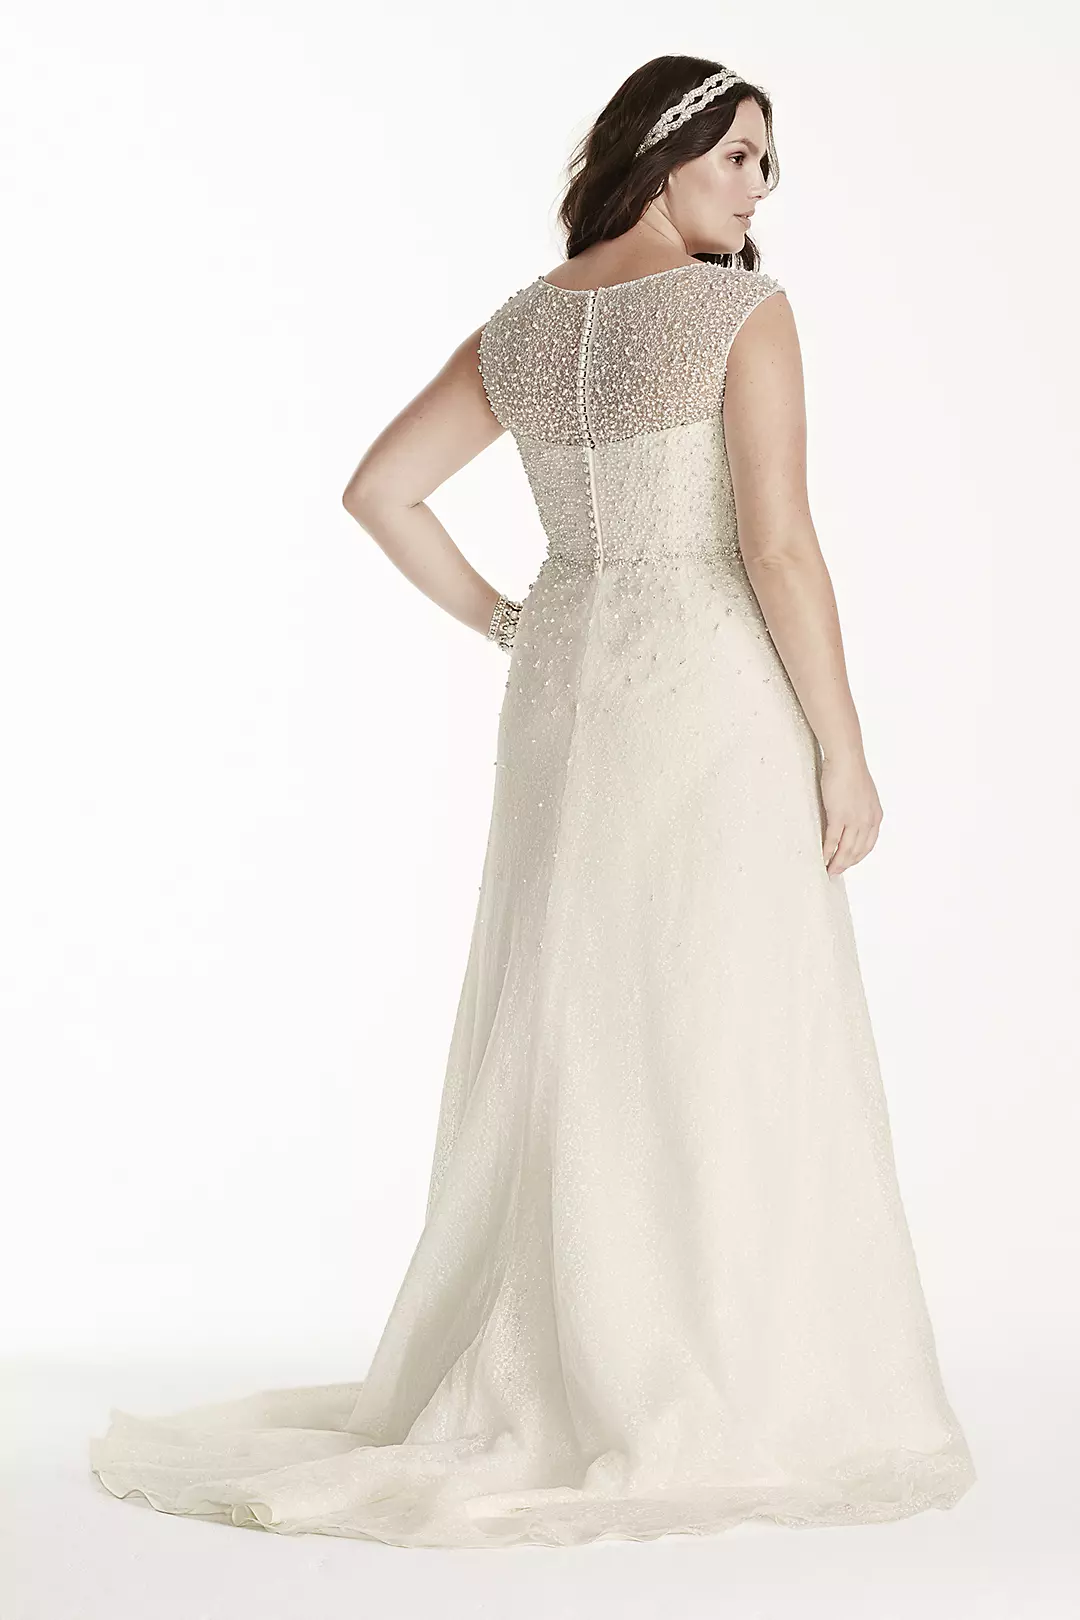 Jewel Cap Sleeve Wedding Dress with Pearl Details Image 2